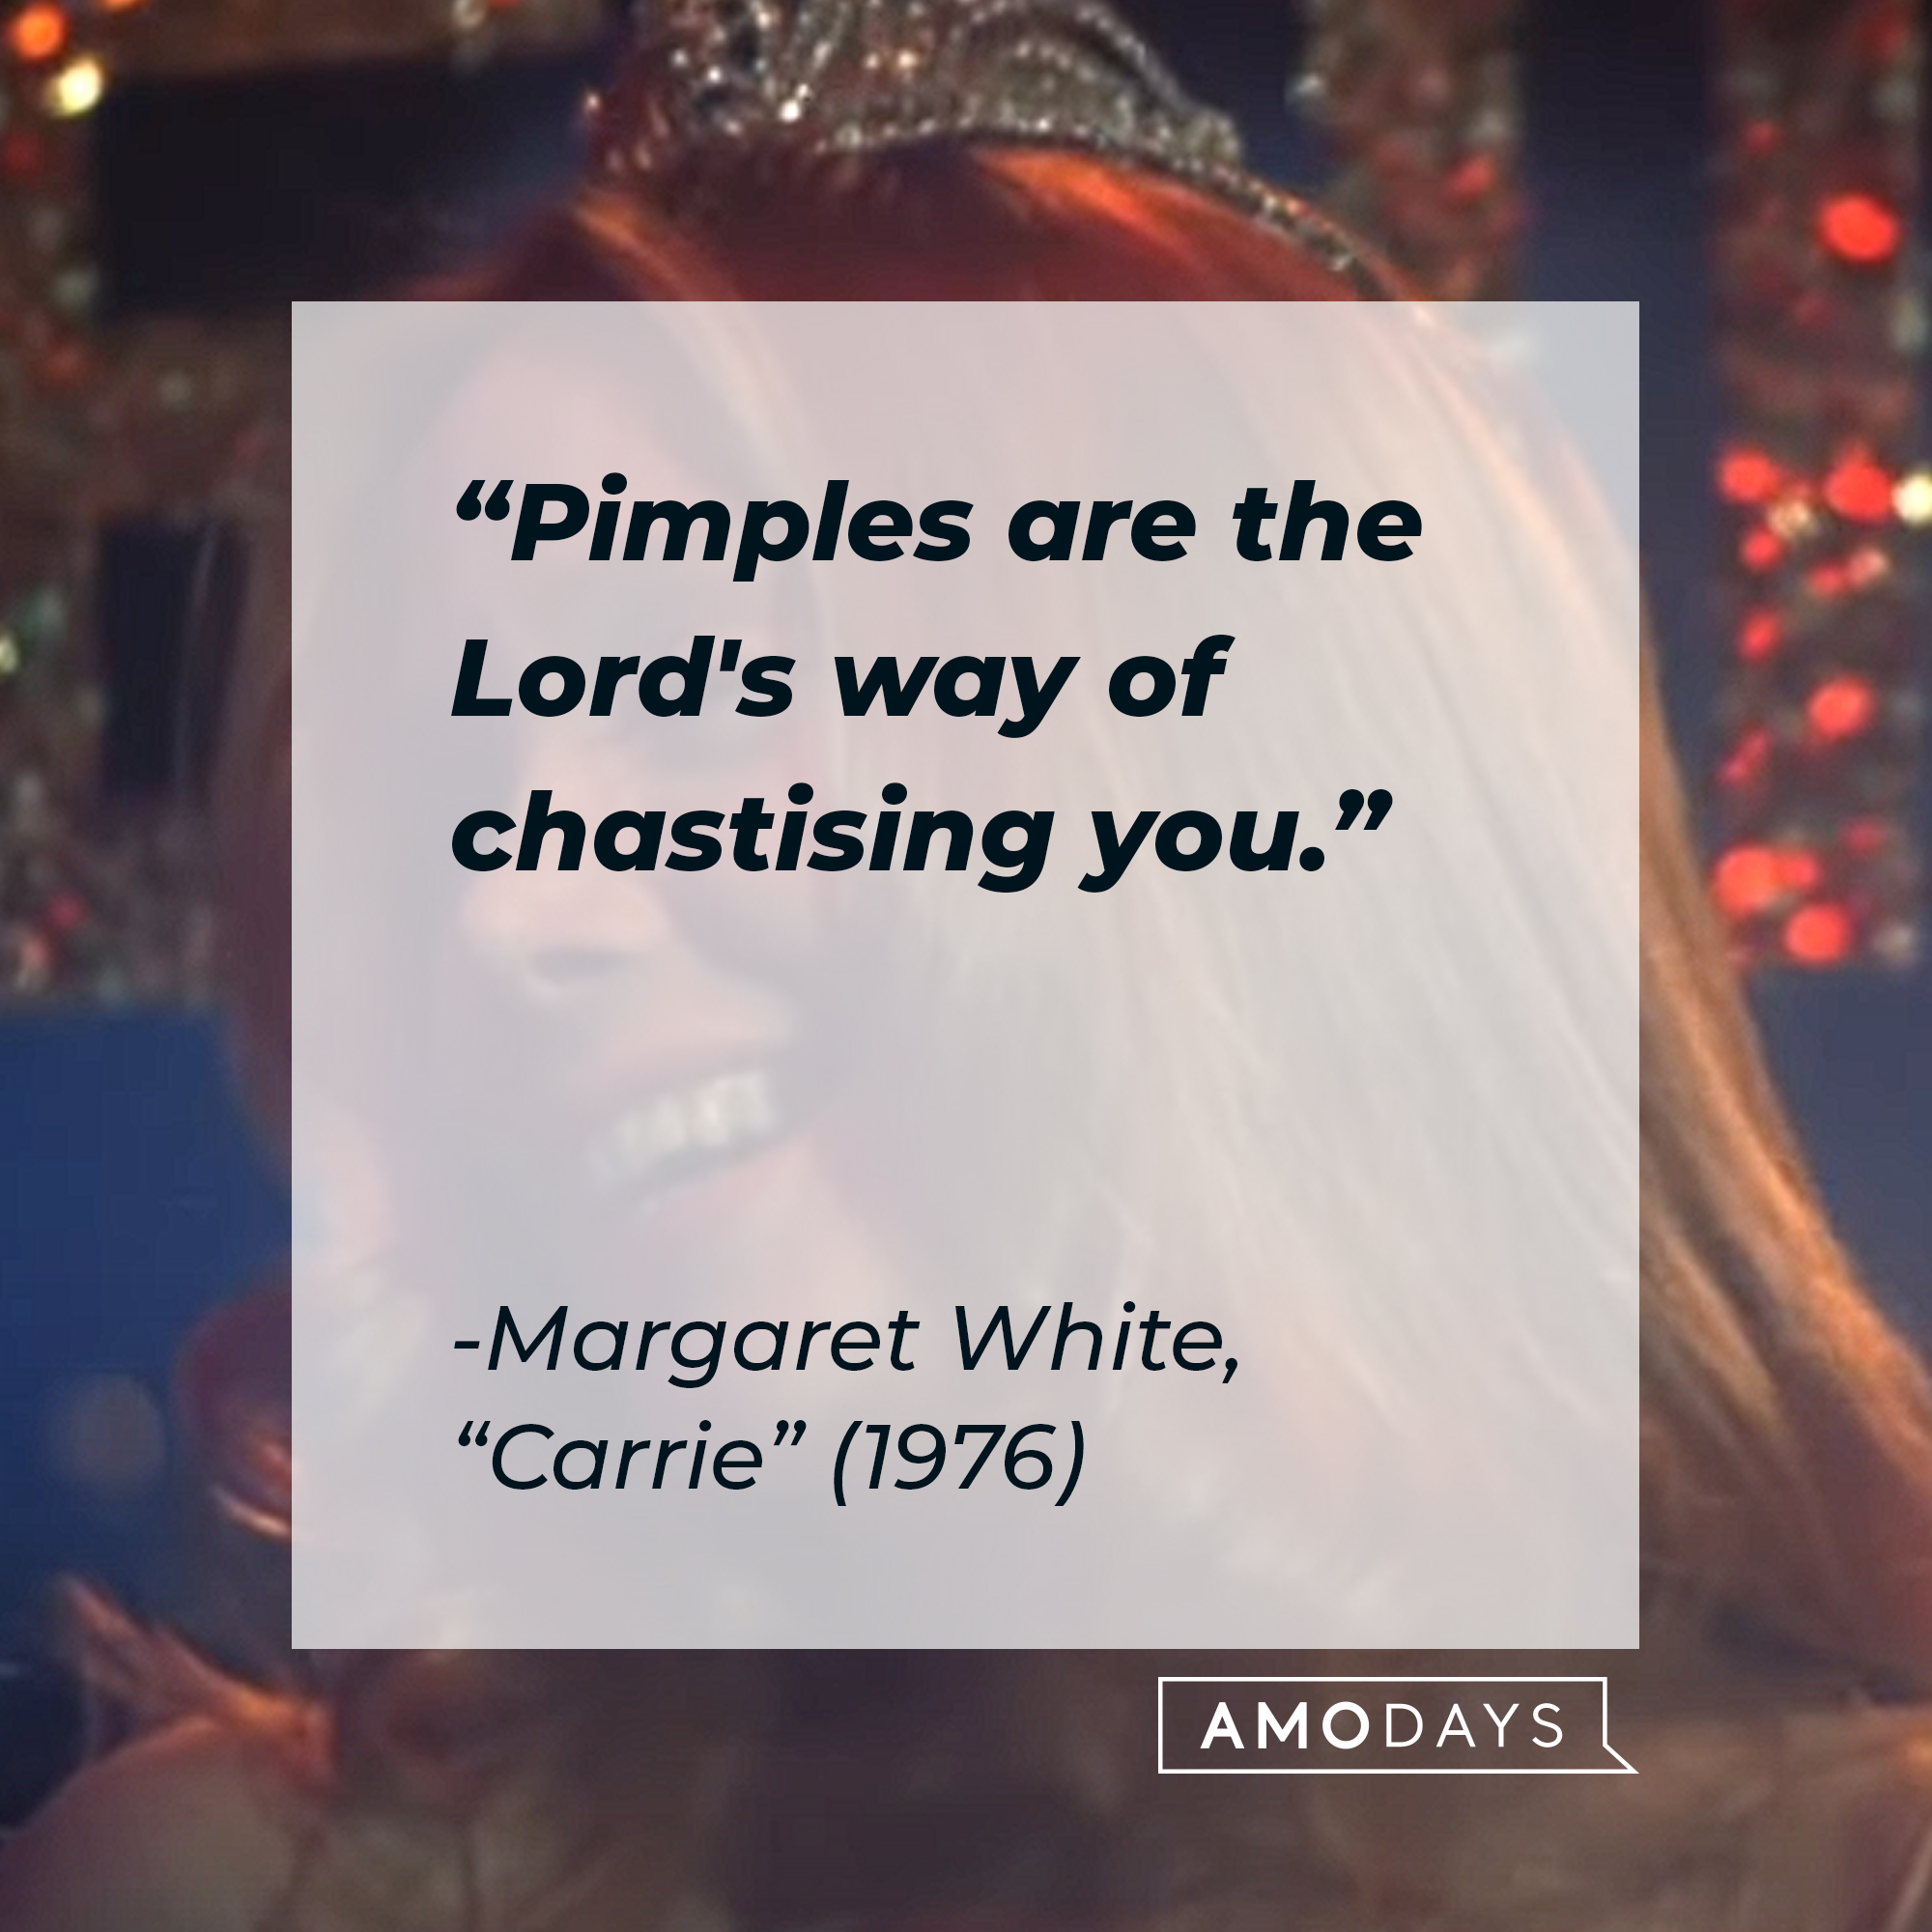 Carrie White's quote: "Pimples are the Lord's way of chastising you." | Source: youtube.com/MGMStudios